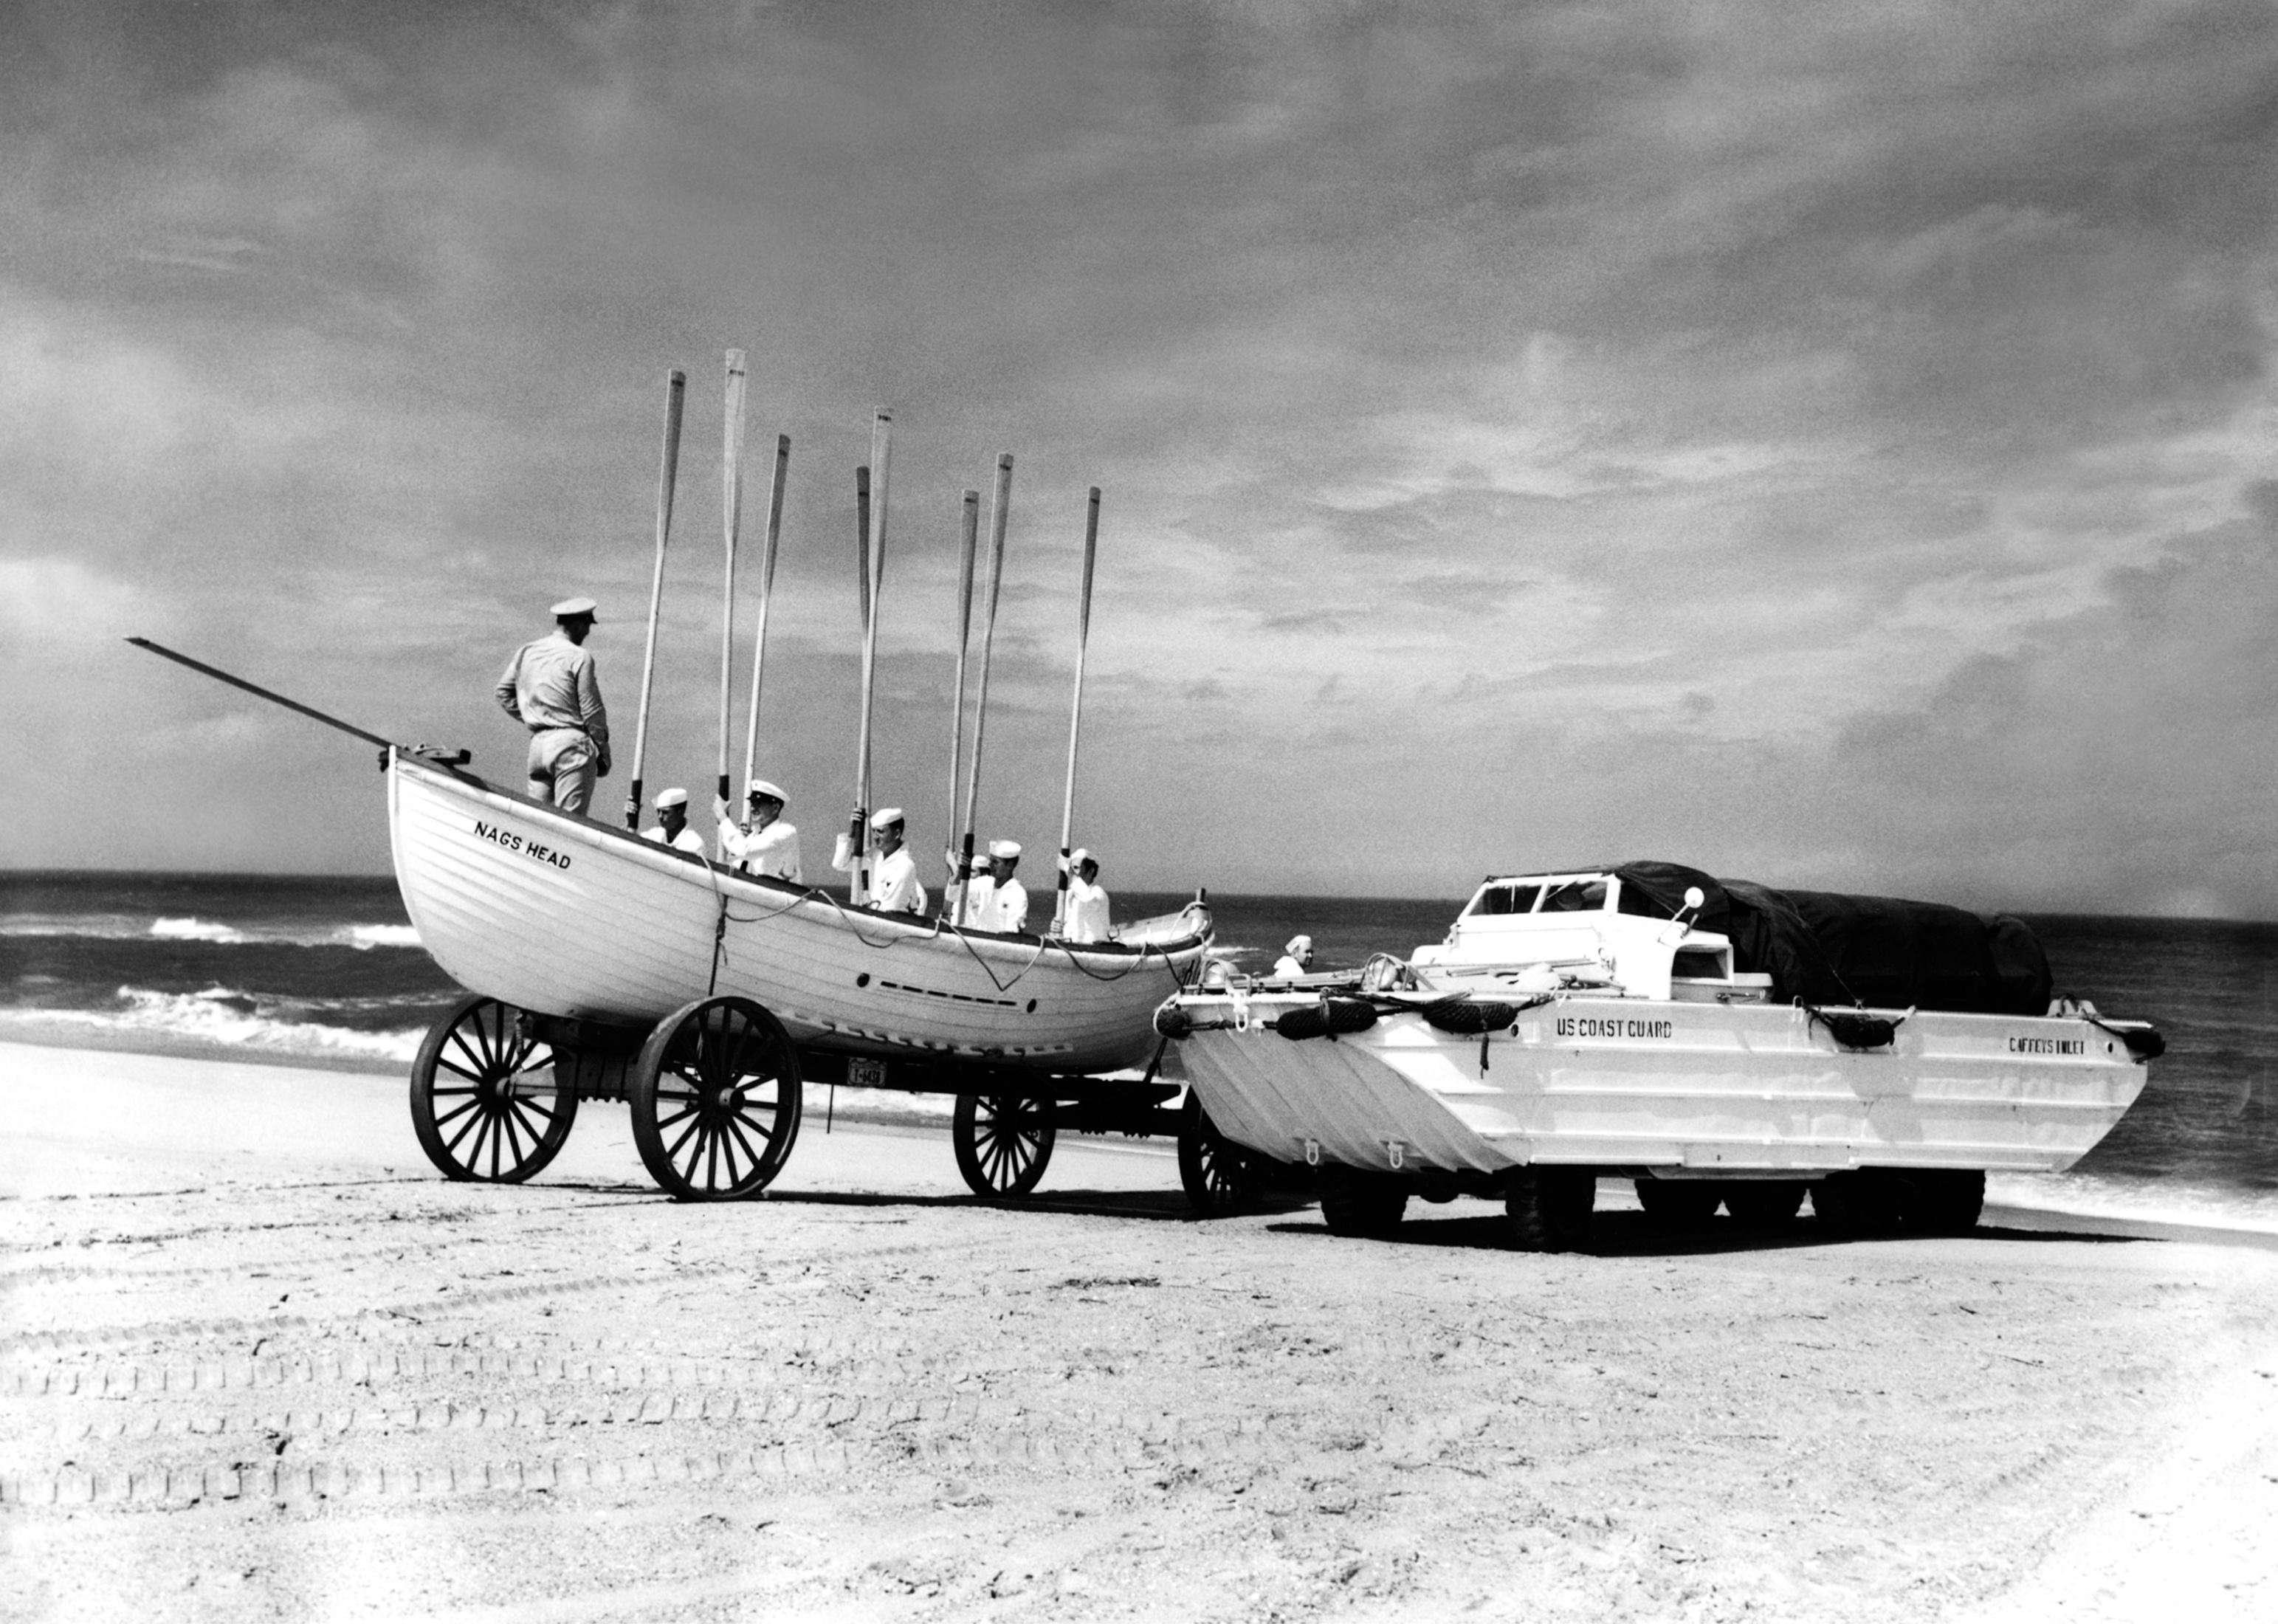 A Coast Guard boat on the beach waiting to take off.